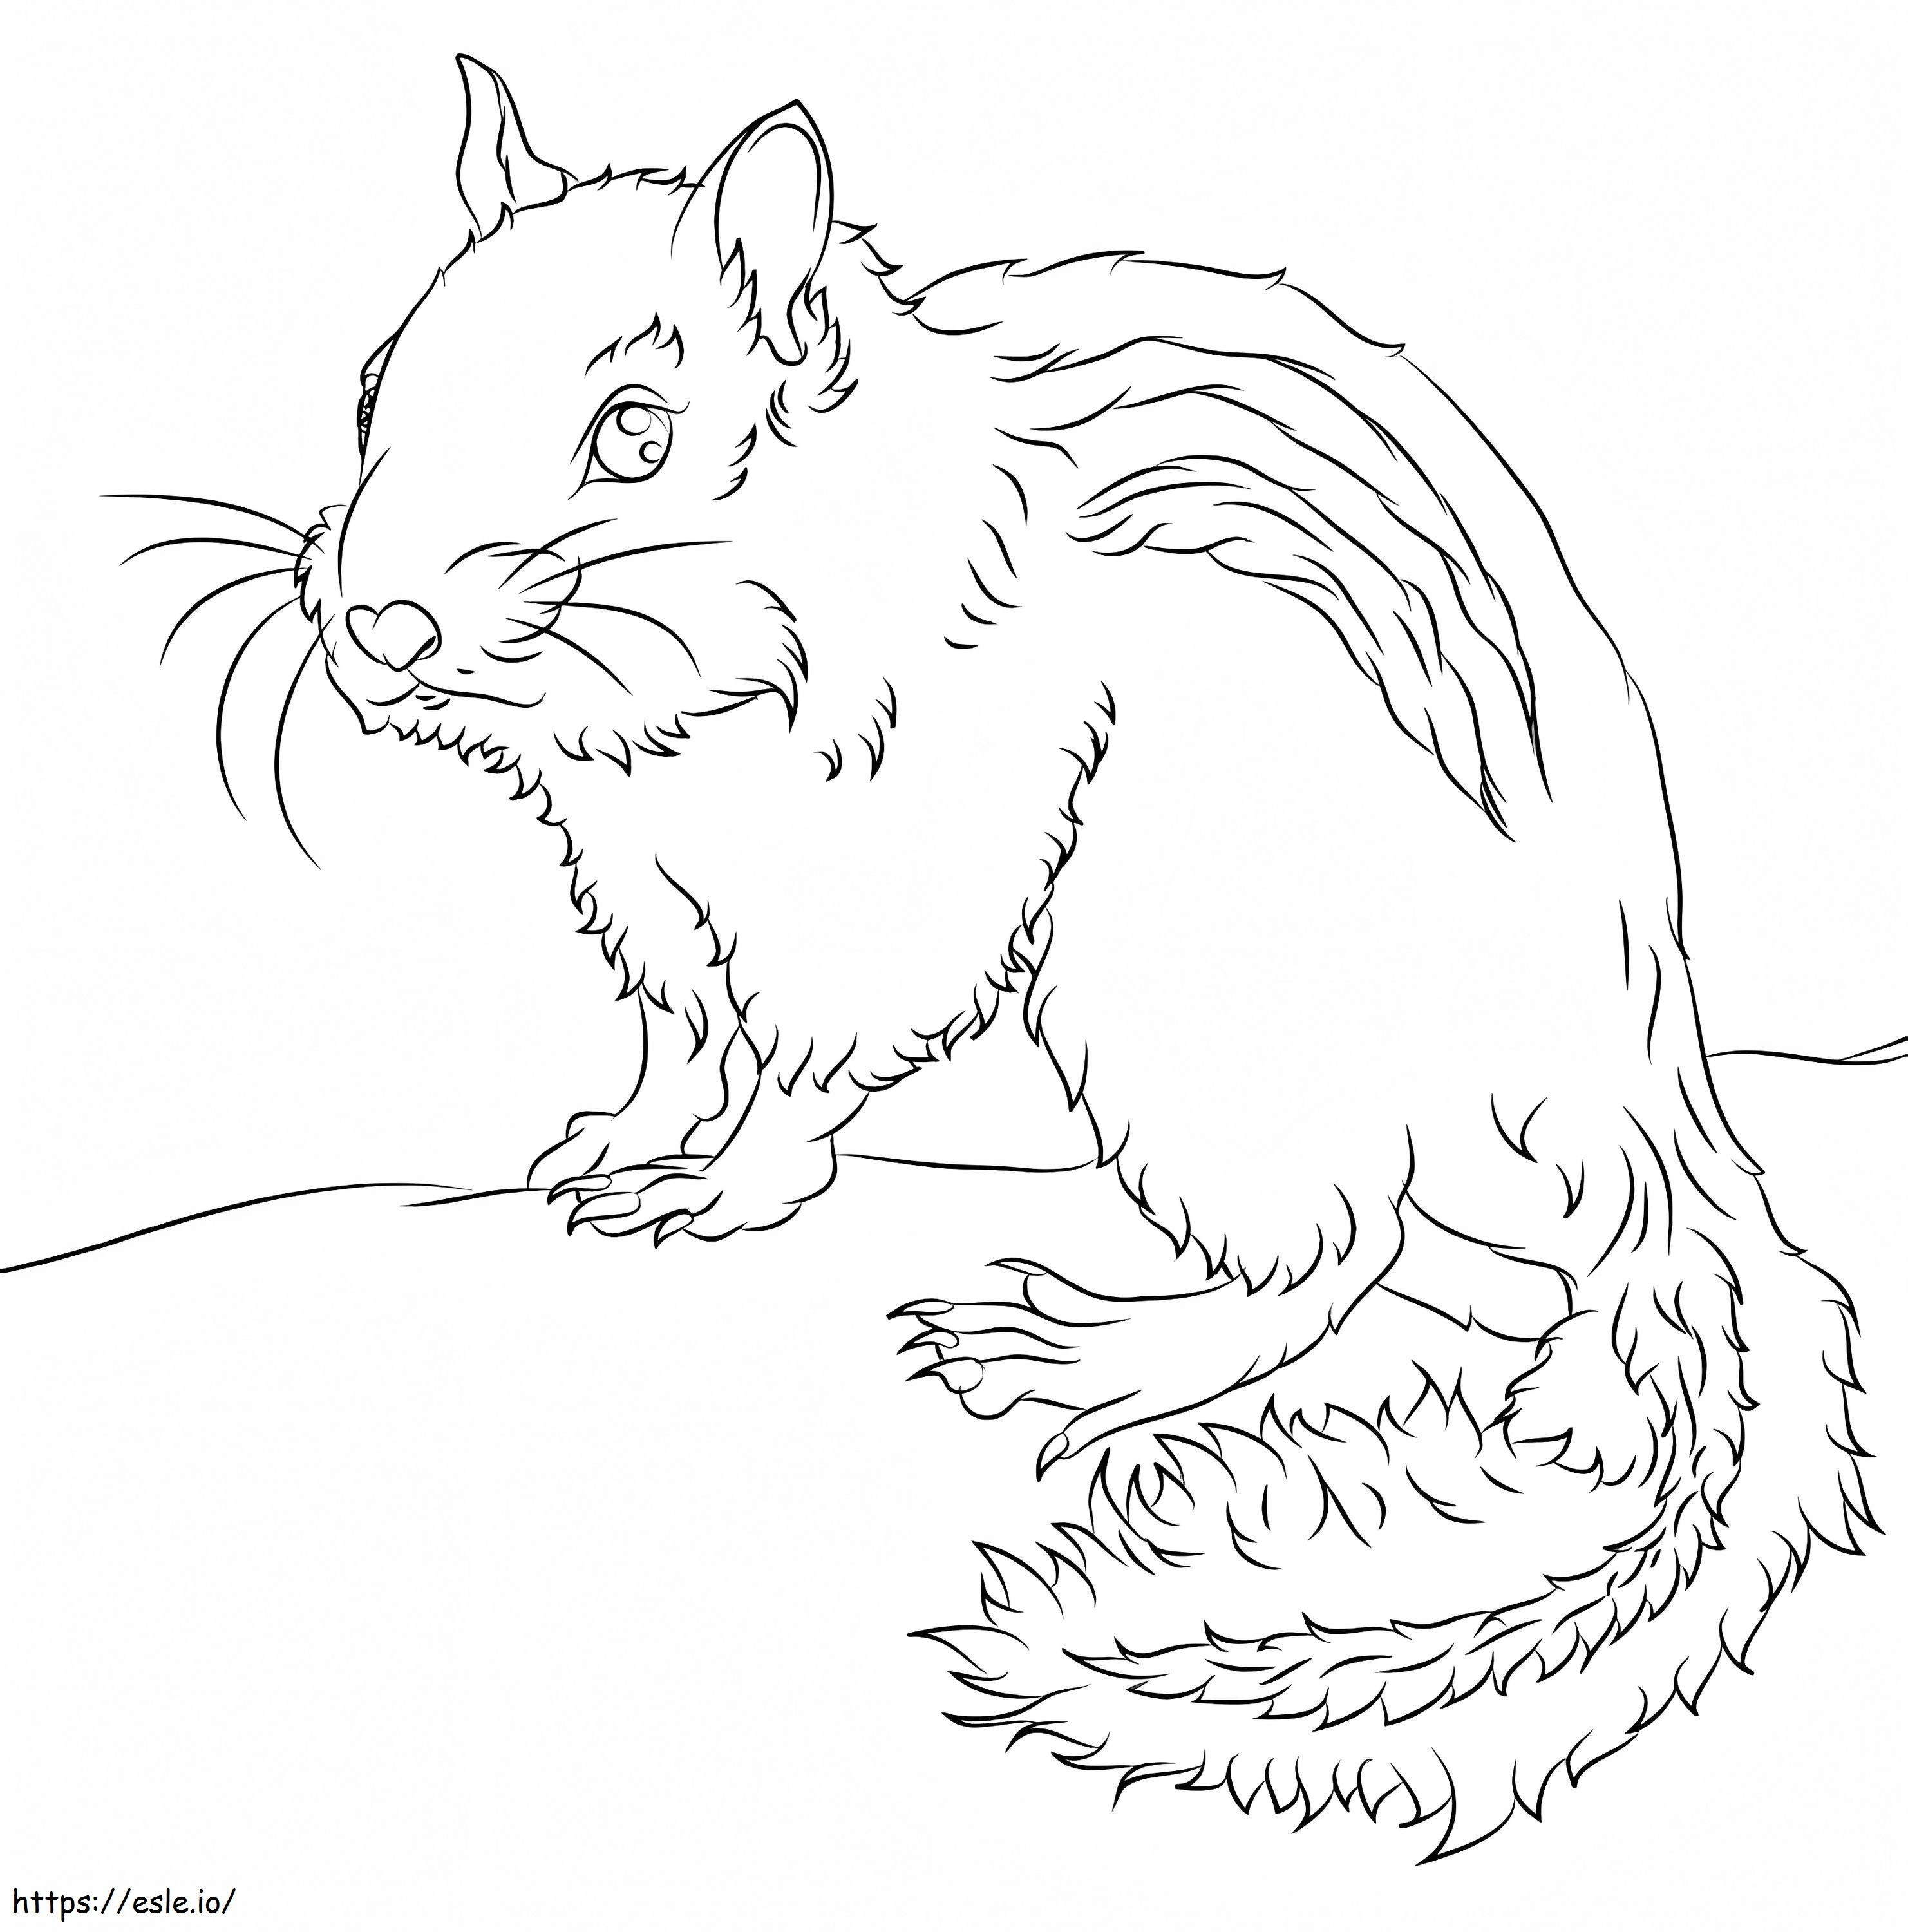 A Chipmunk coloring page